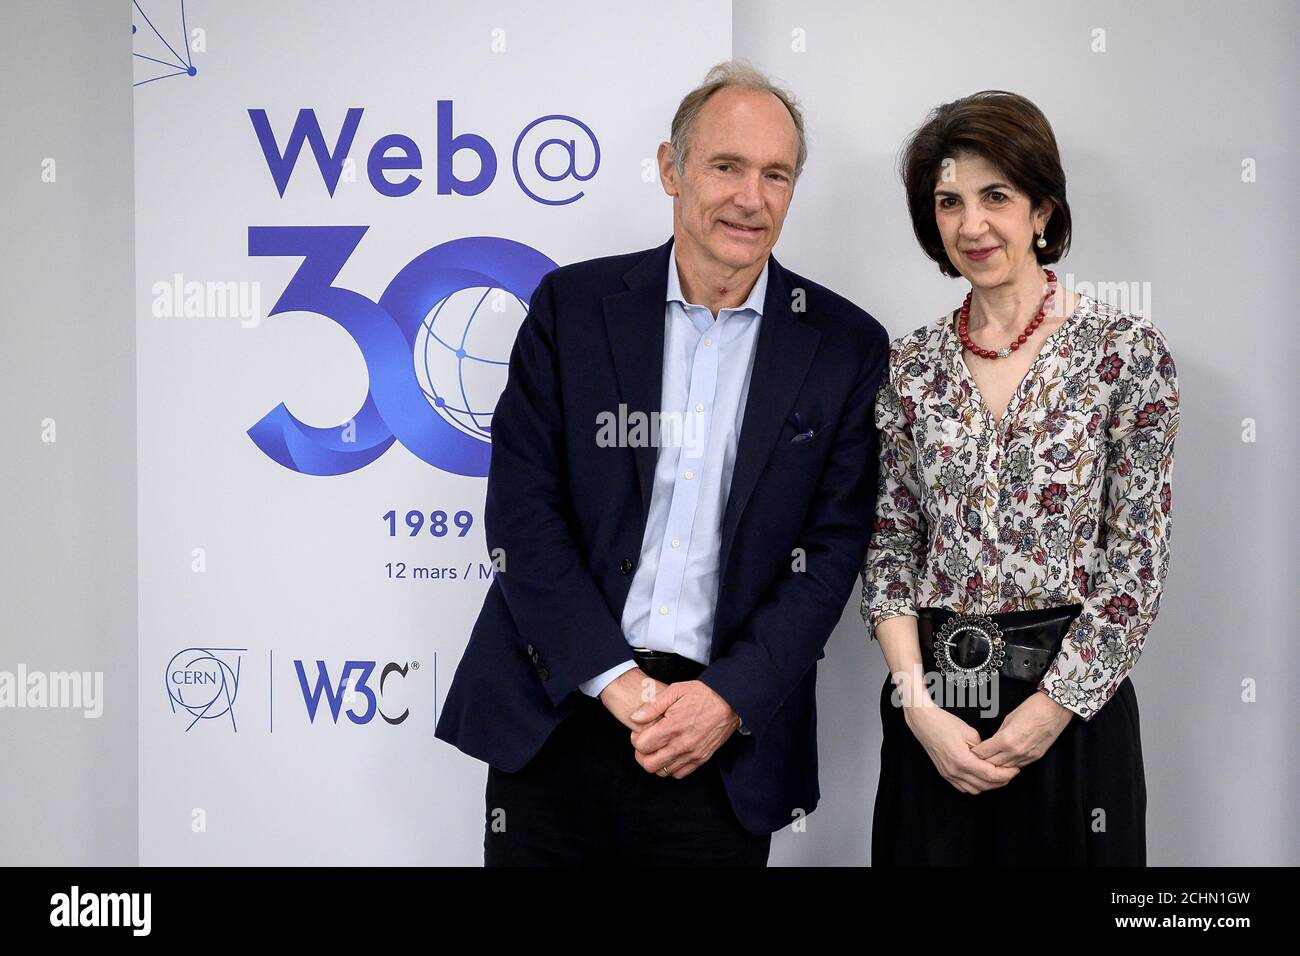 World Wide Web inventor Tim Berners-Lee poses with European Centre for Nuclear Research (CERN) director general Gianotti during an event marking years of World Wide Web, on March 12, 2019